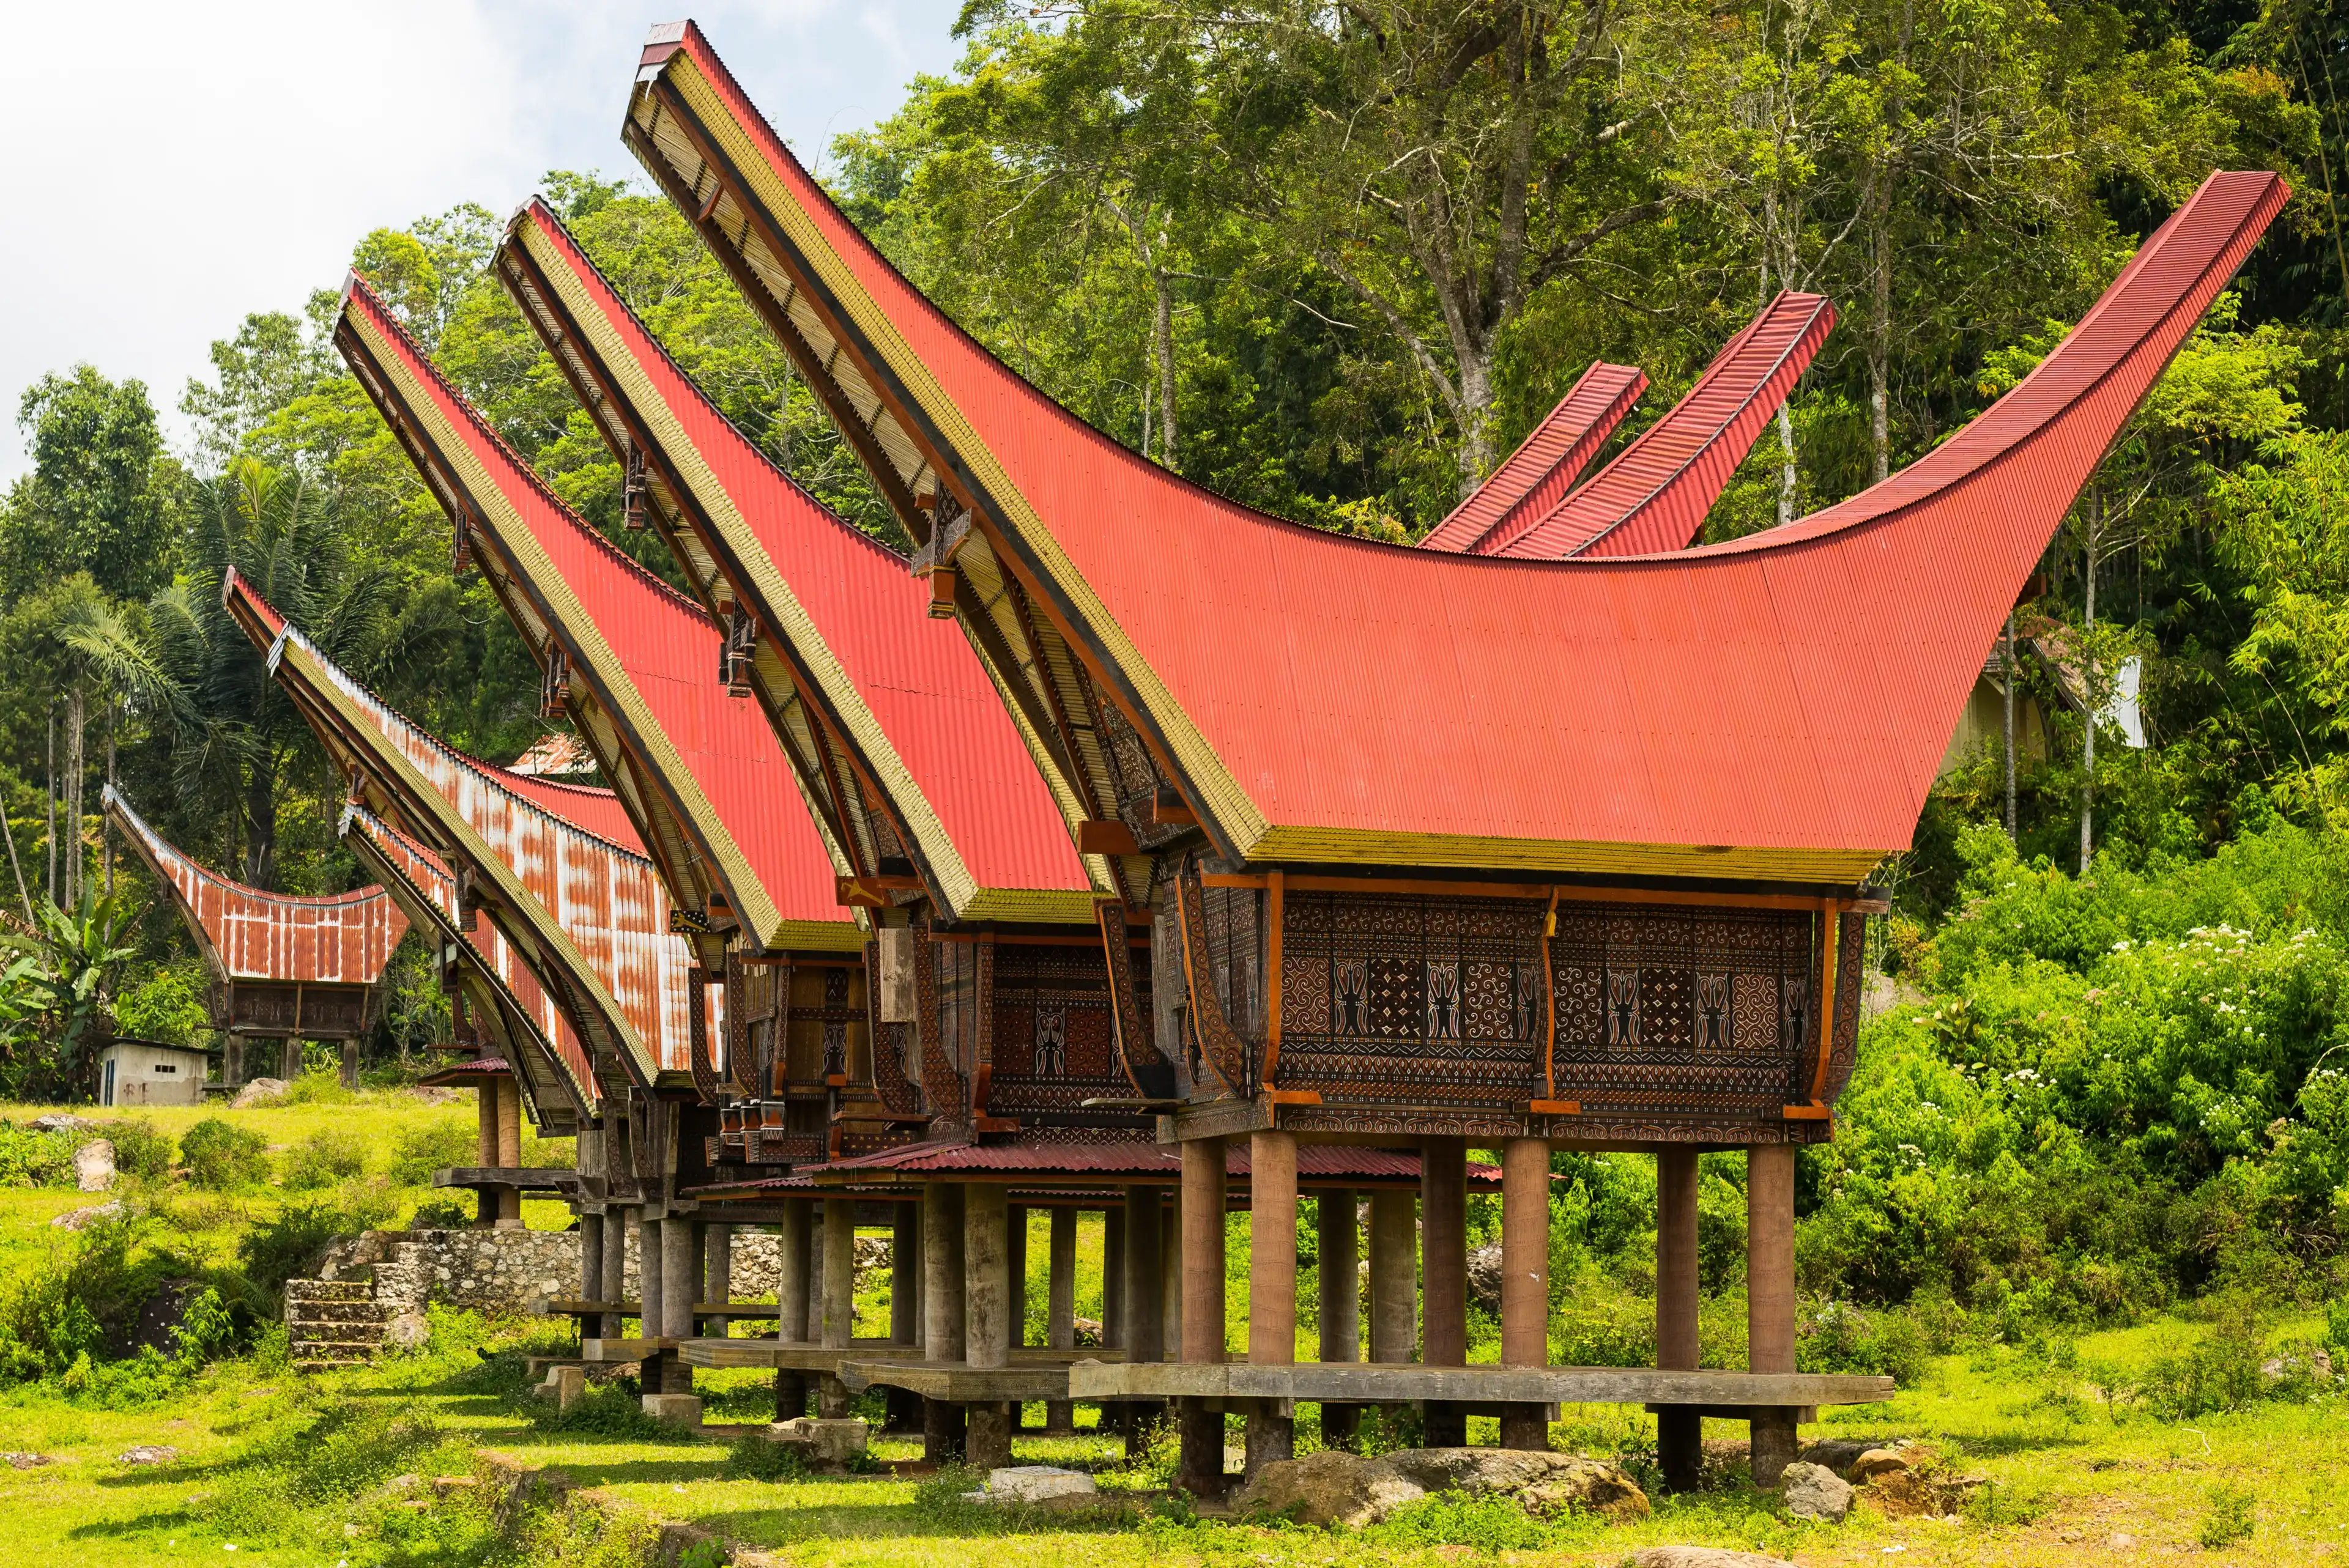 Traditional village of residential buildings with decorated facade and boat shaped roofs. Tana Toraja, South Sulawesi, Indonesia.